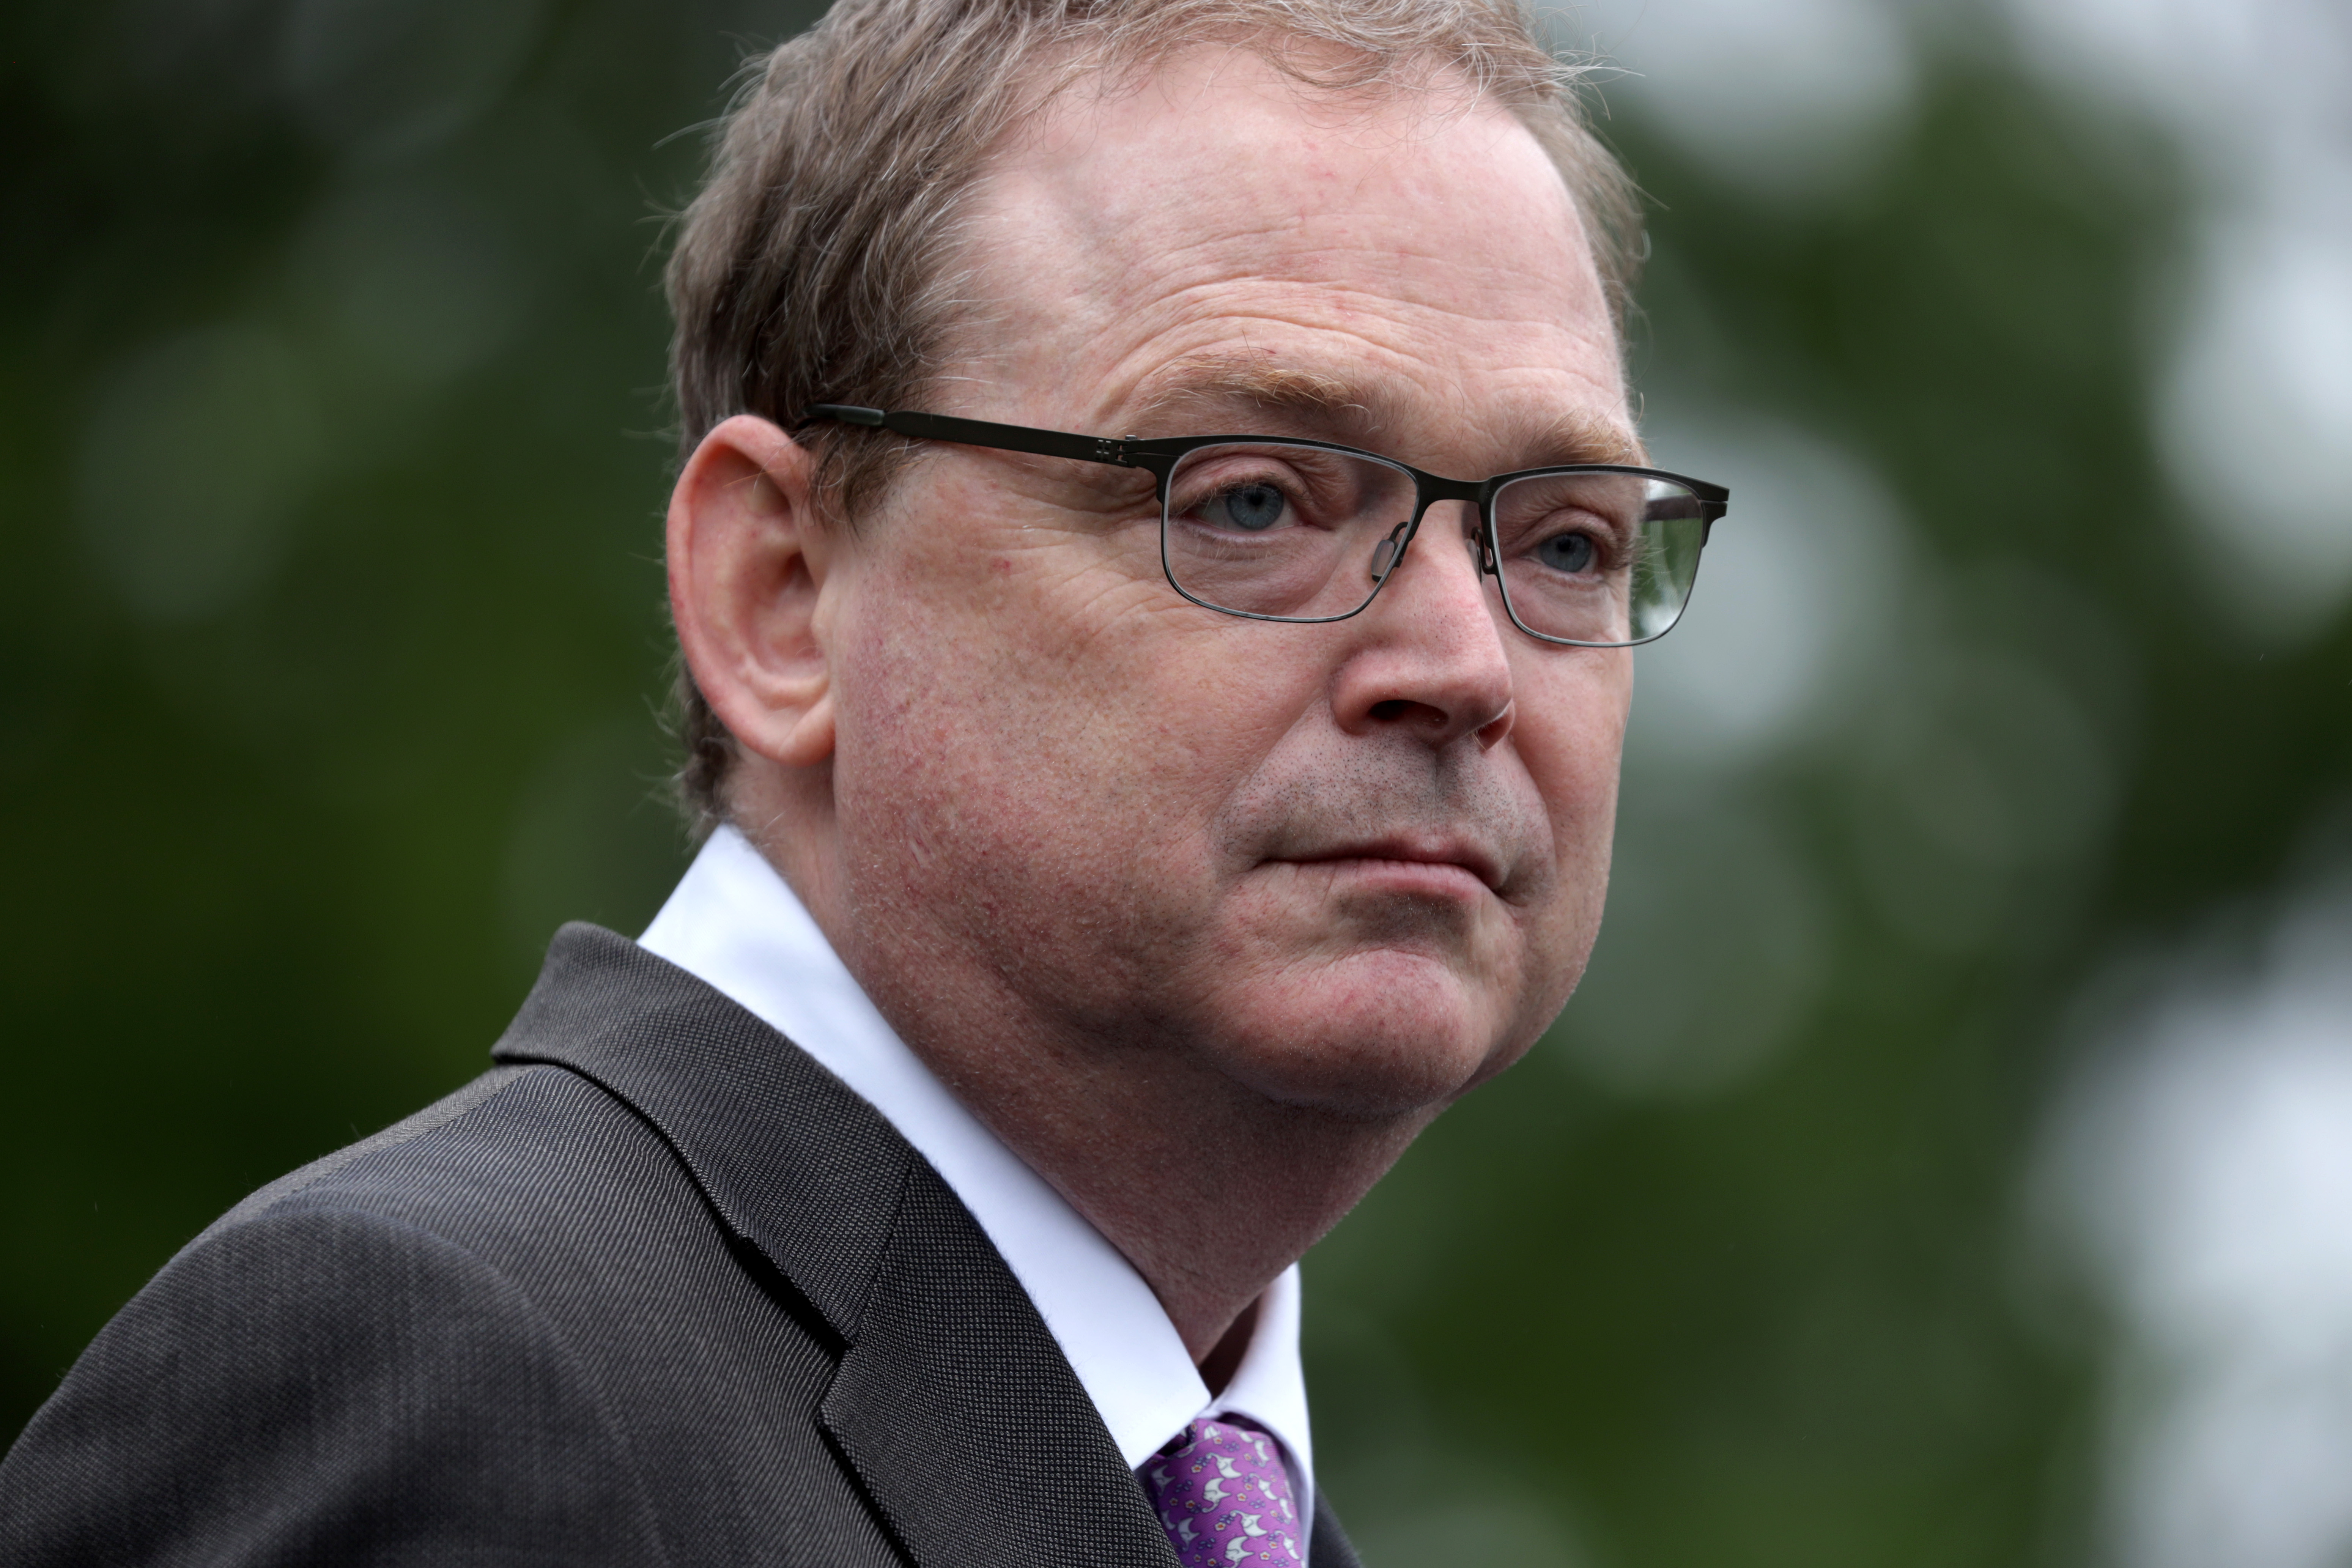 White House economic adviser Kevin Hassett speaks to the press at the White House on May 22.